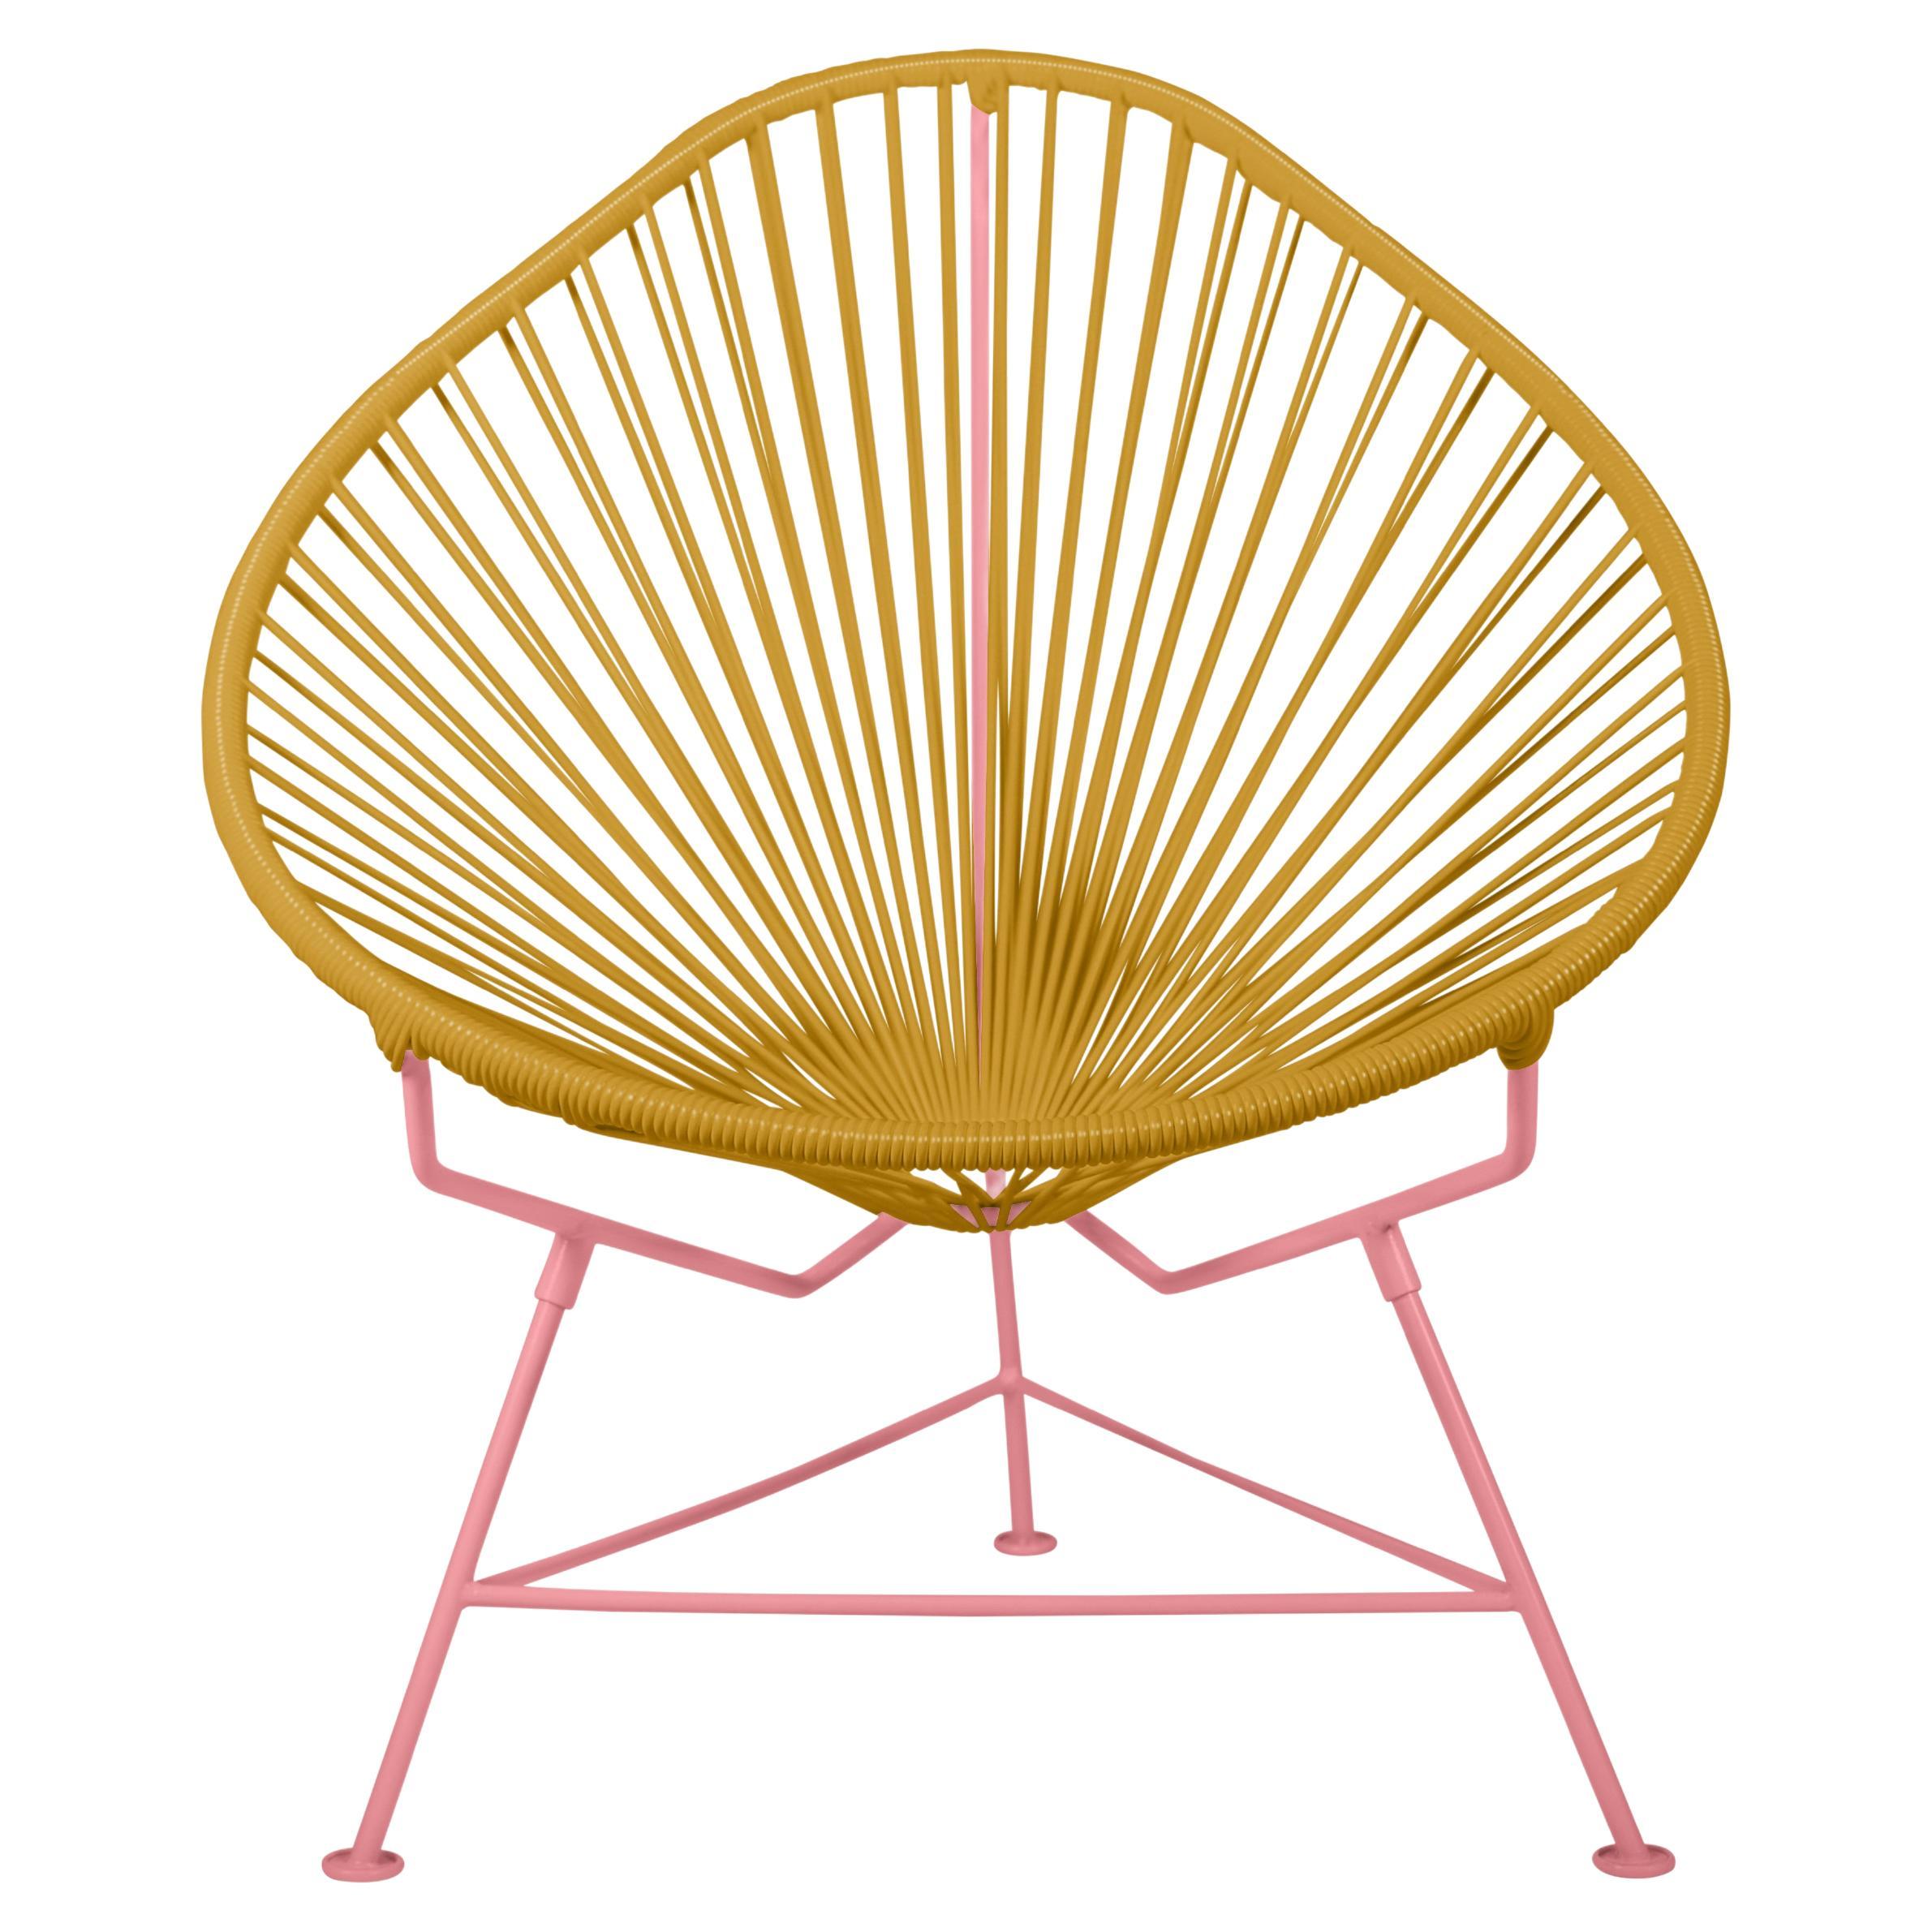 Innit Designs Acapulco Chair Caramel Weave on Coral Frame